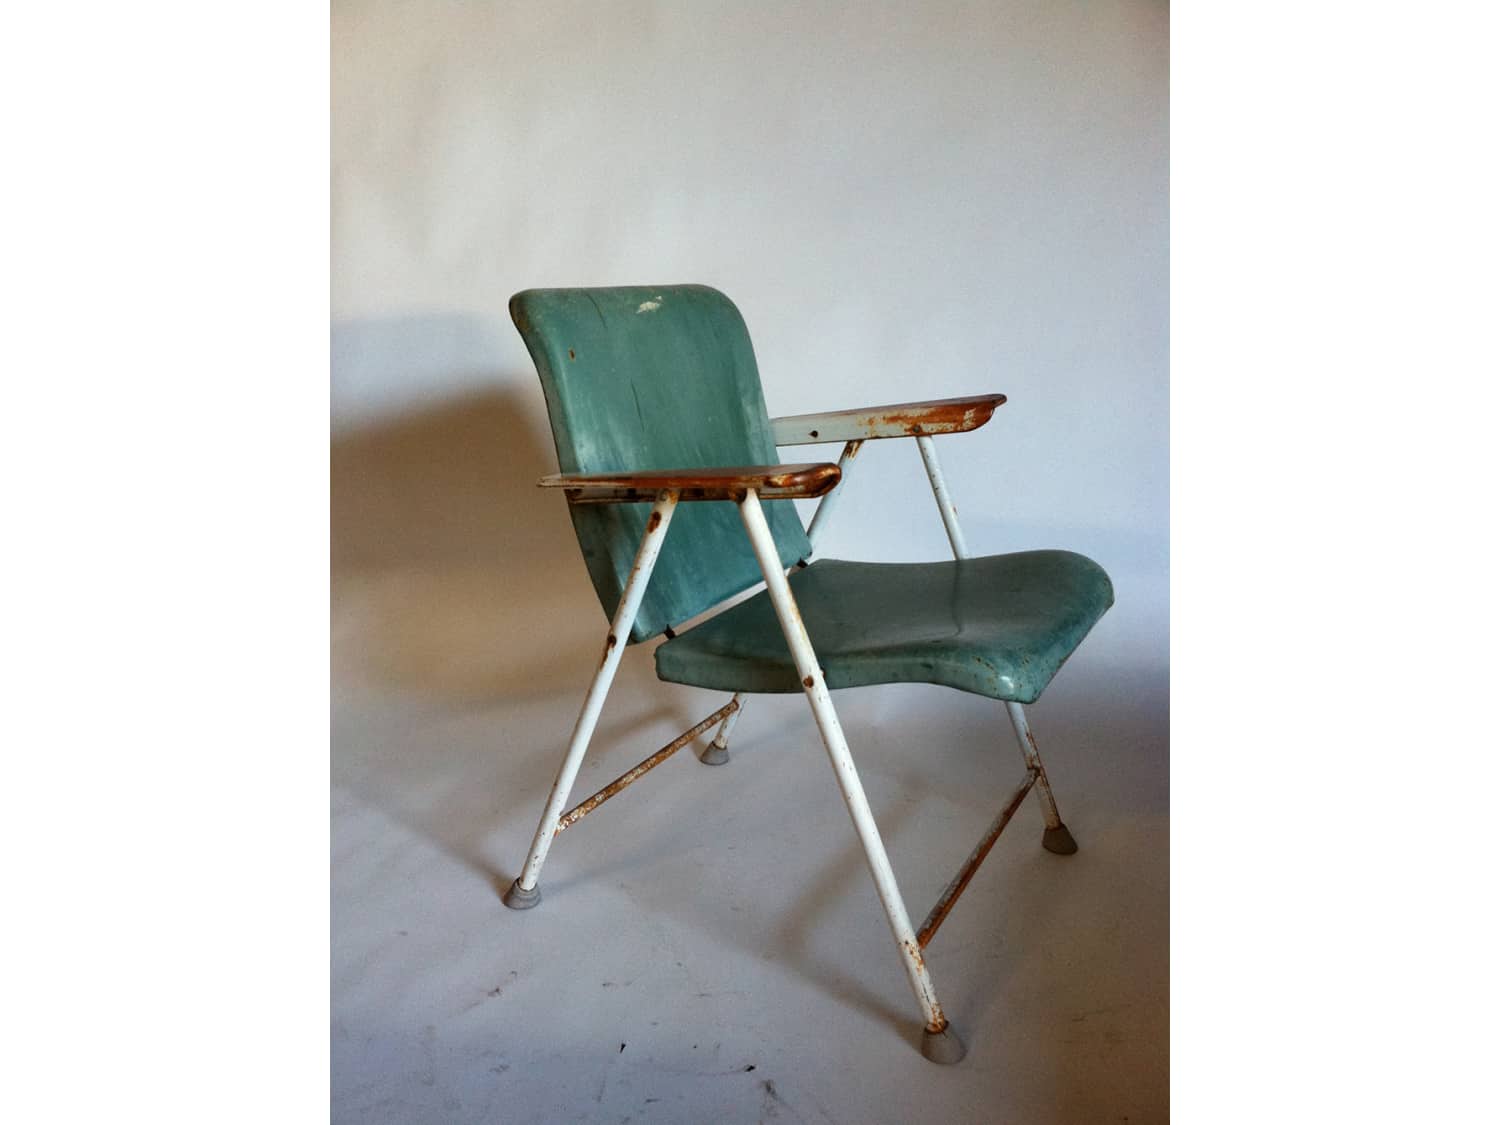 1950s Russel Wright Metal Folding Chairs By Samson Apartment